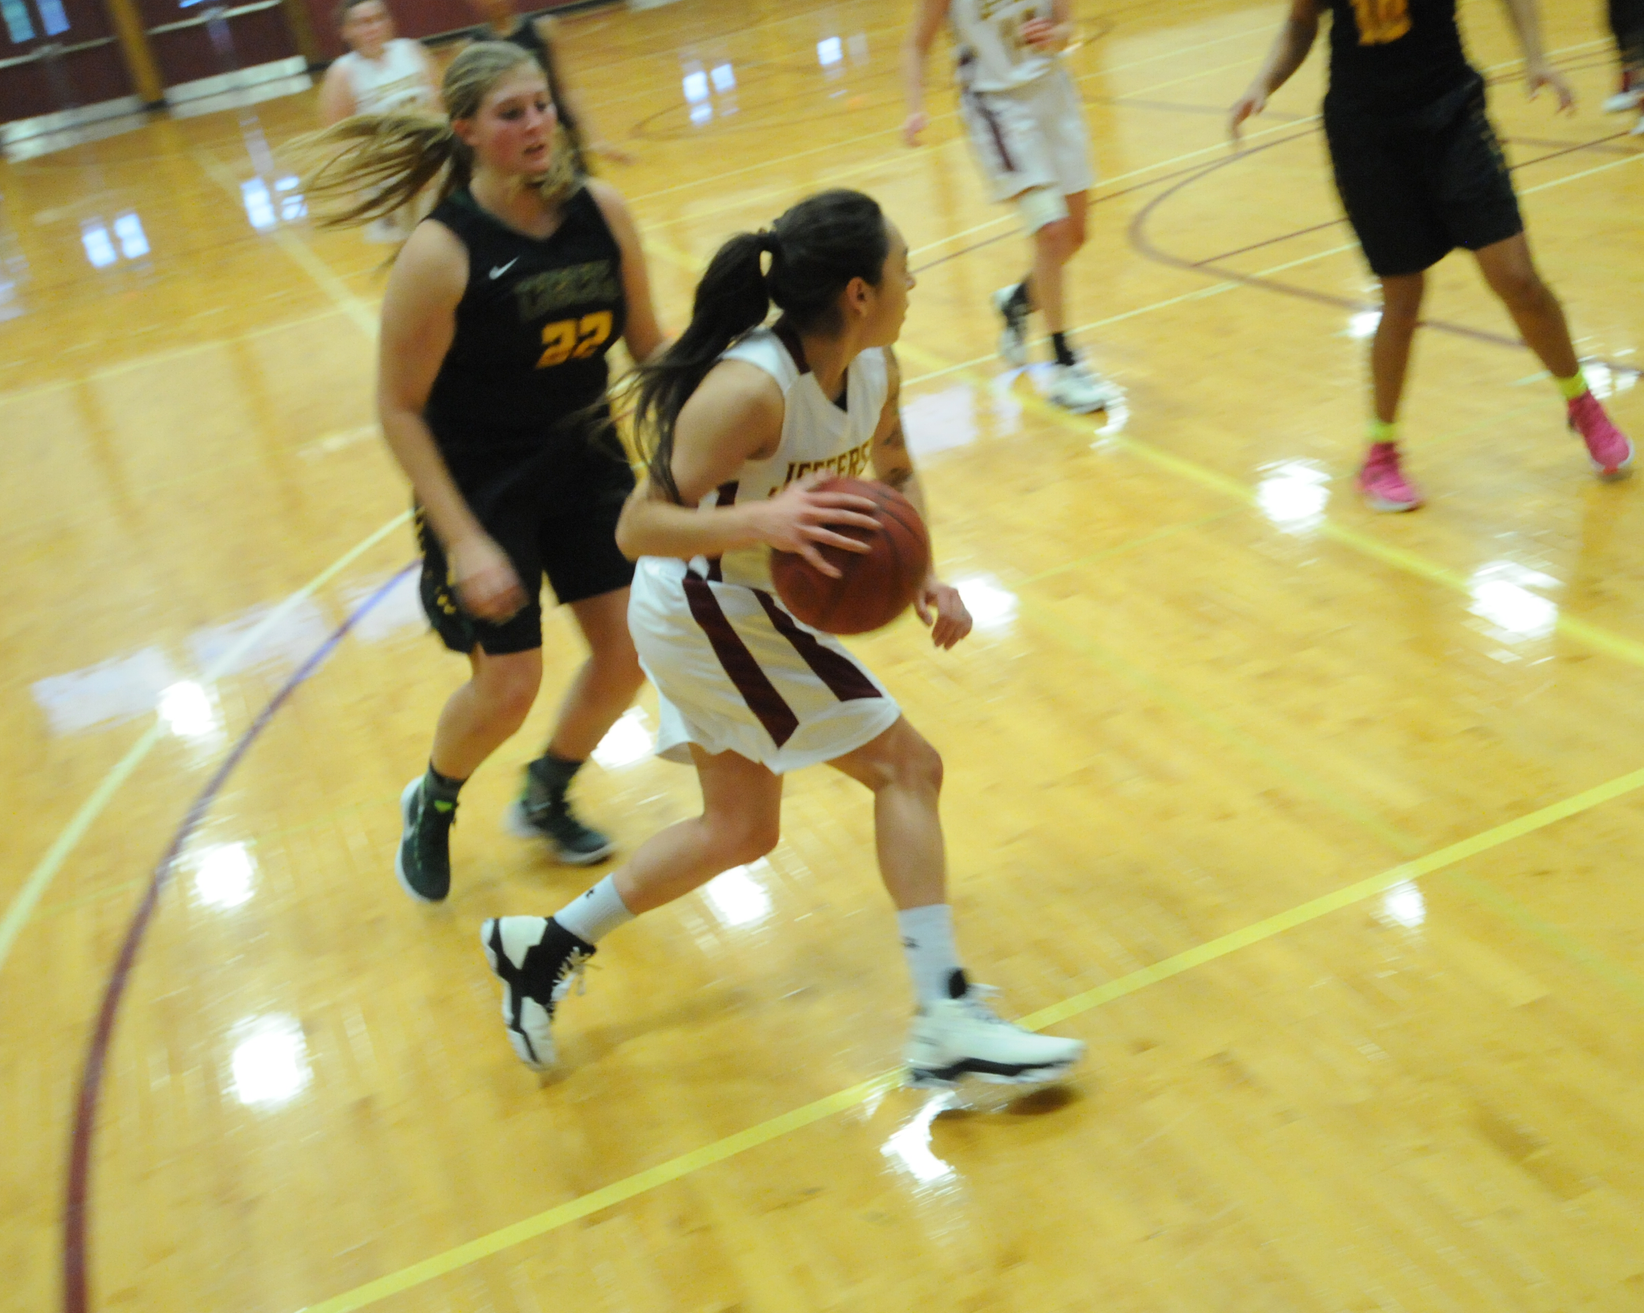 Lady Generals were no match for the Lady Cannoneers